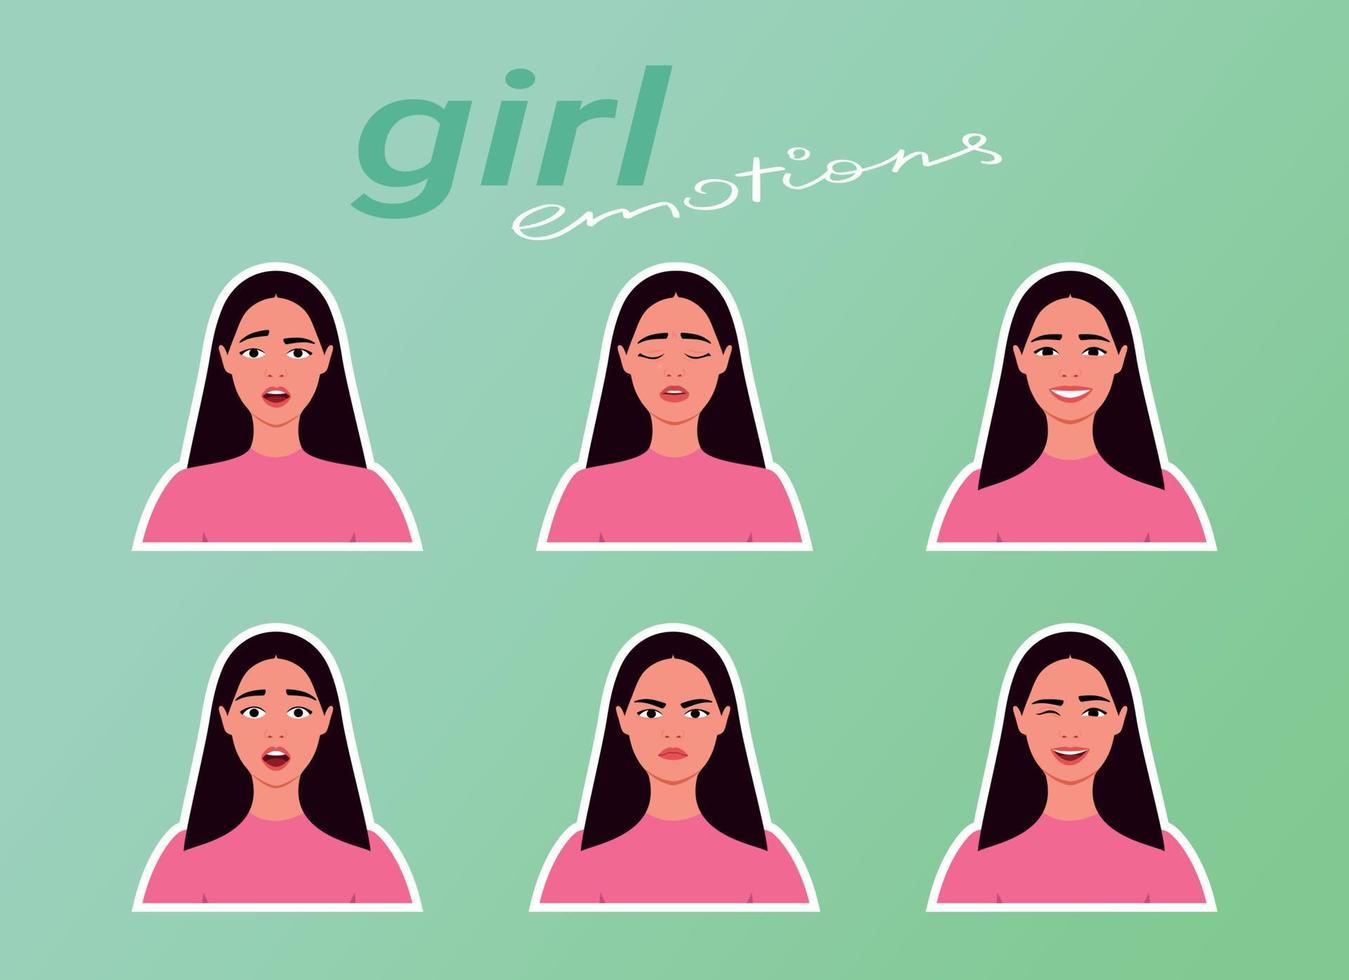 Girl emotions sticker pack. Human emotions. Young woman confusing, crying, smiling, scared, angry and laughing. Confusion, sadness, joy, fear, anger and fun. Flat style vector